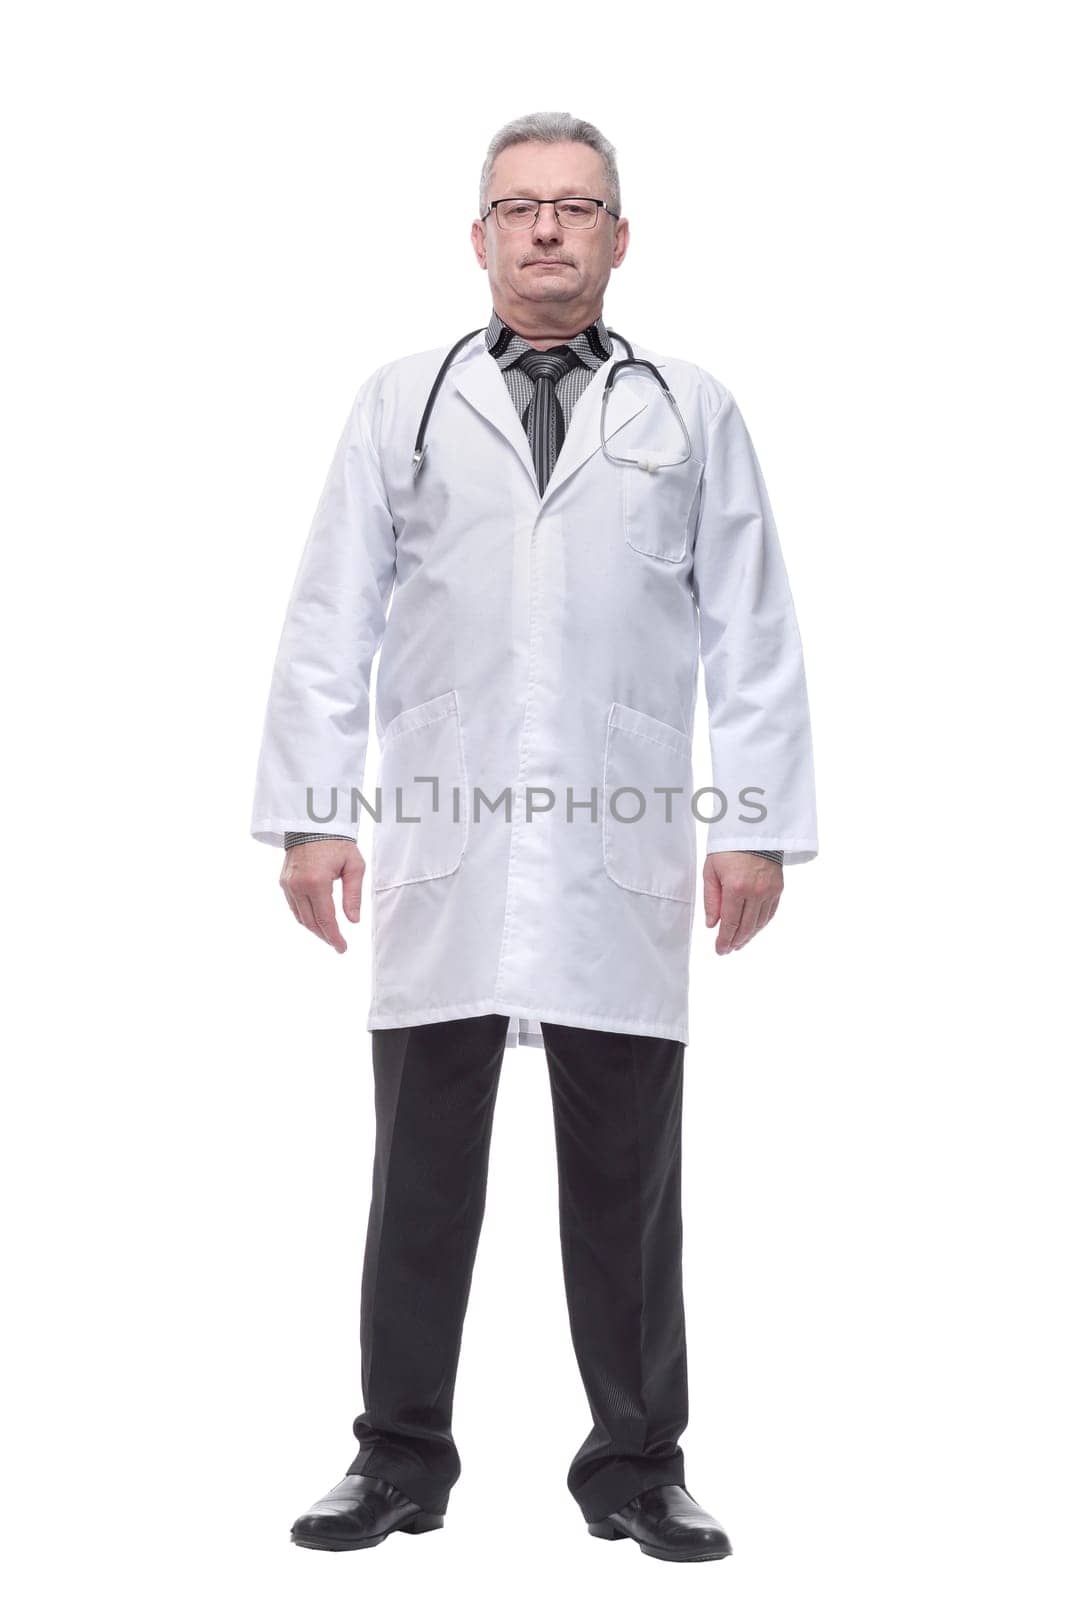 Handsome confident male doctor or surgeon standing in a white coat with a tie and a stethoscope around his neck by asdf